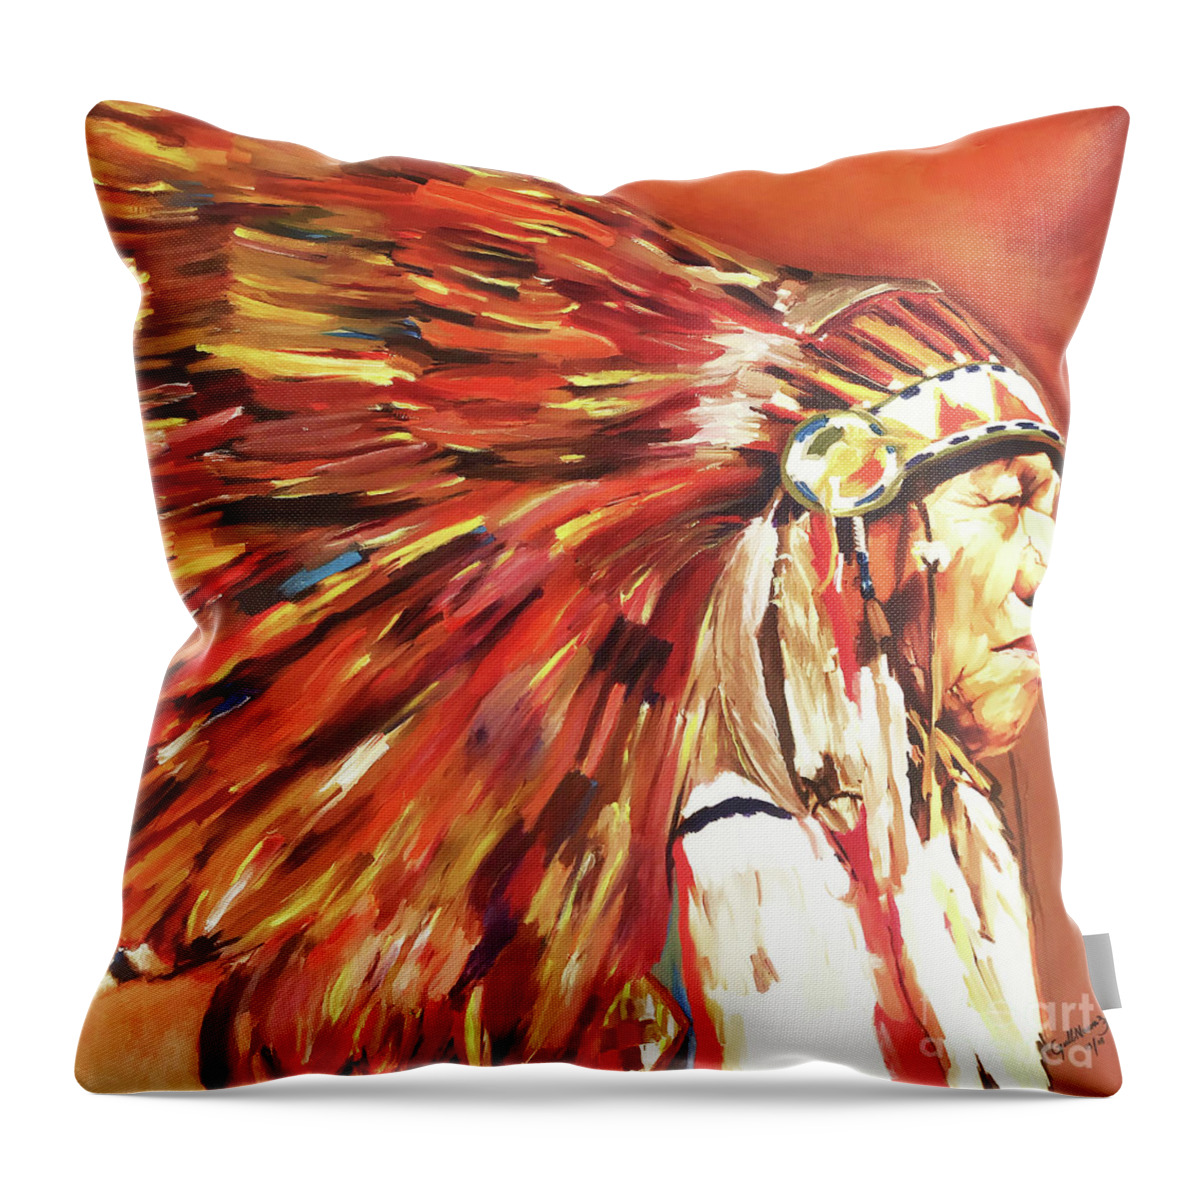 Native American Throw Pillow featuring the painting Native American Warriors 01 by Gull G